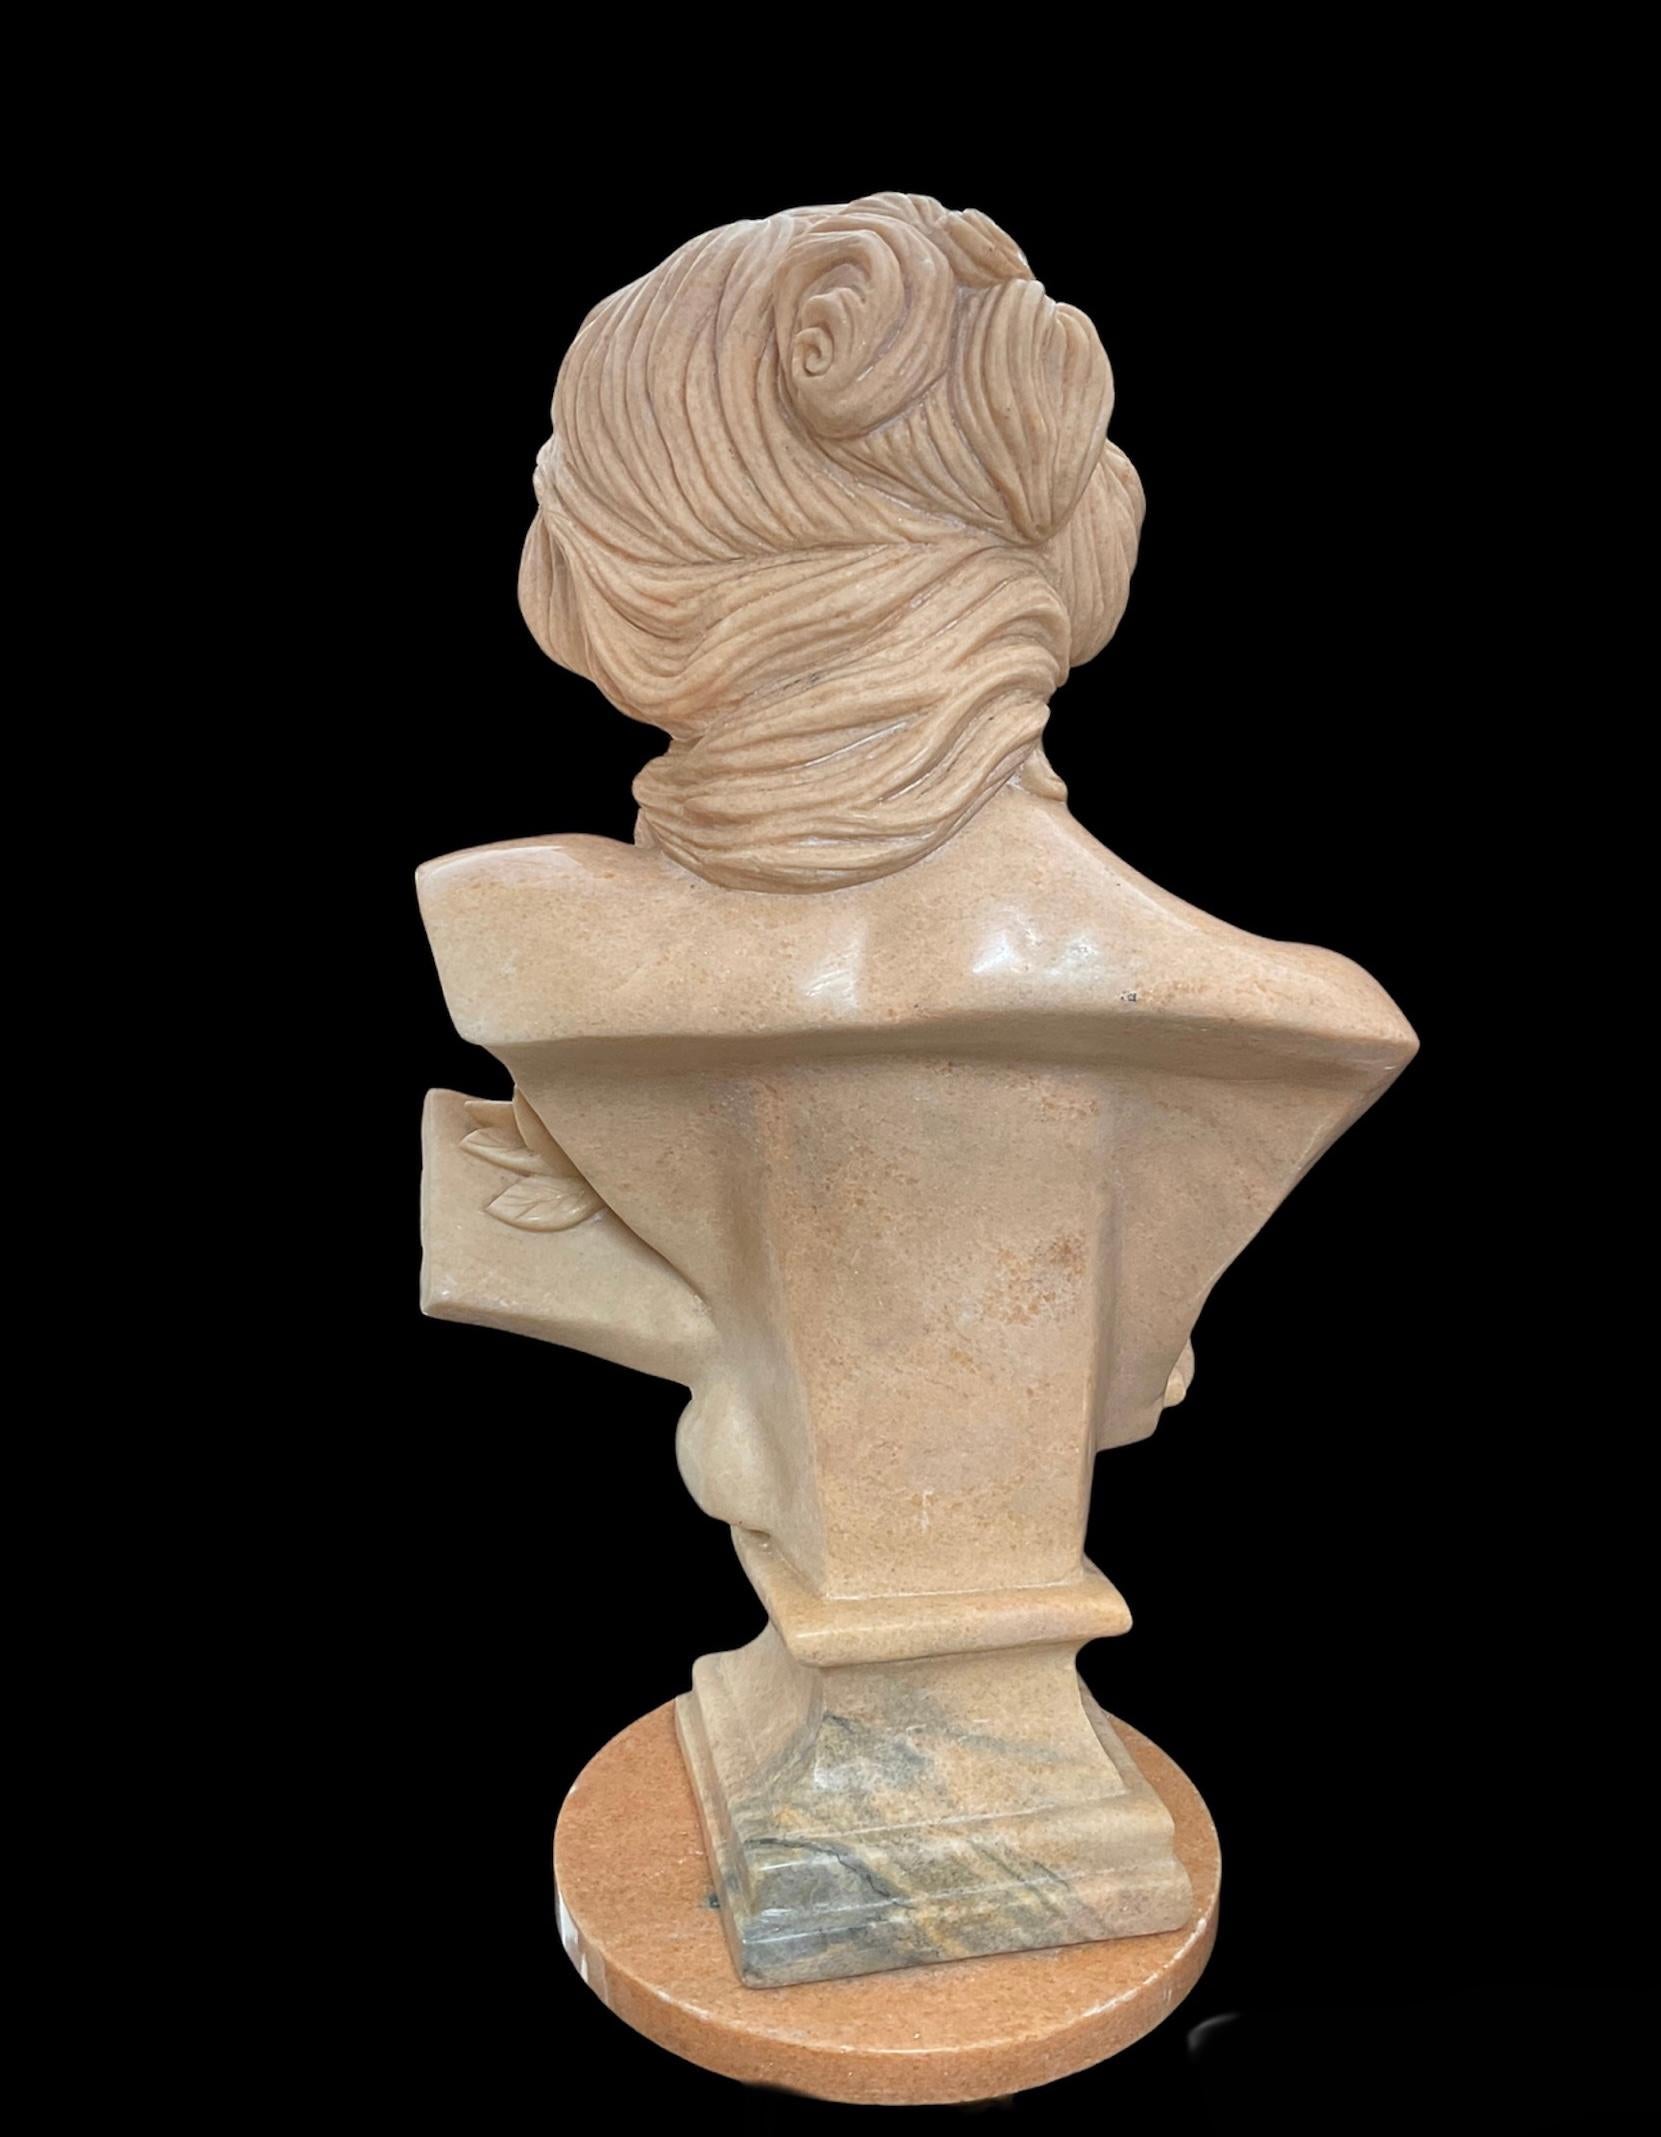 This a large rose beige marble bust of a modern music goddess. She has abundant wavy hair arranged to the side. Her head is tilted to the same side of the hair while she is looking down with a sweet gaze. Her chest is semi-covered by a robe. One of